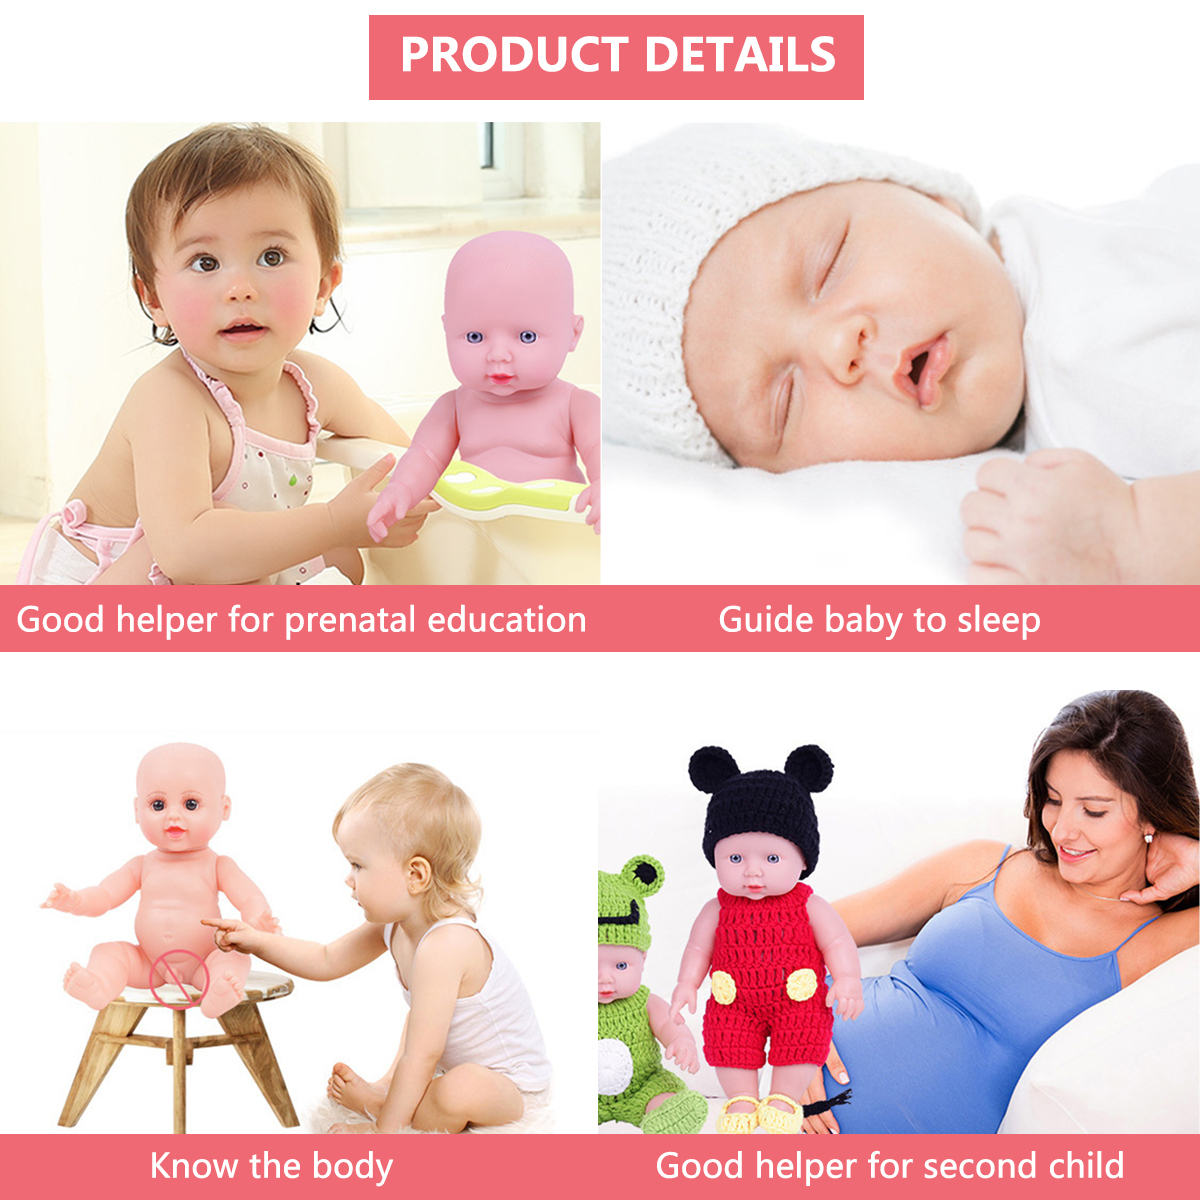 30CM-Height-Simulation-Soft-Silicone-Vinyl-Joint-Removable-Washable-Reborn-Baby-Doll-Toy-for-Kids-Bi-1812138-12